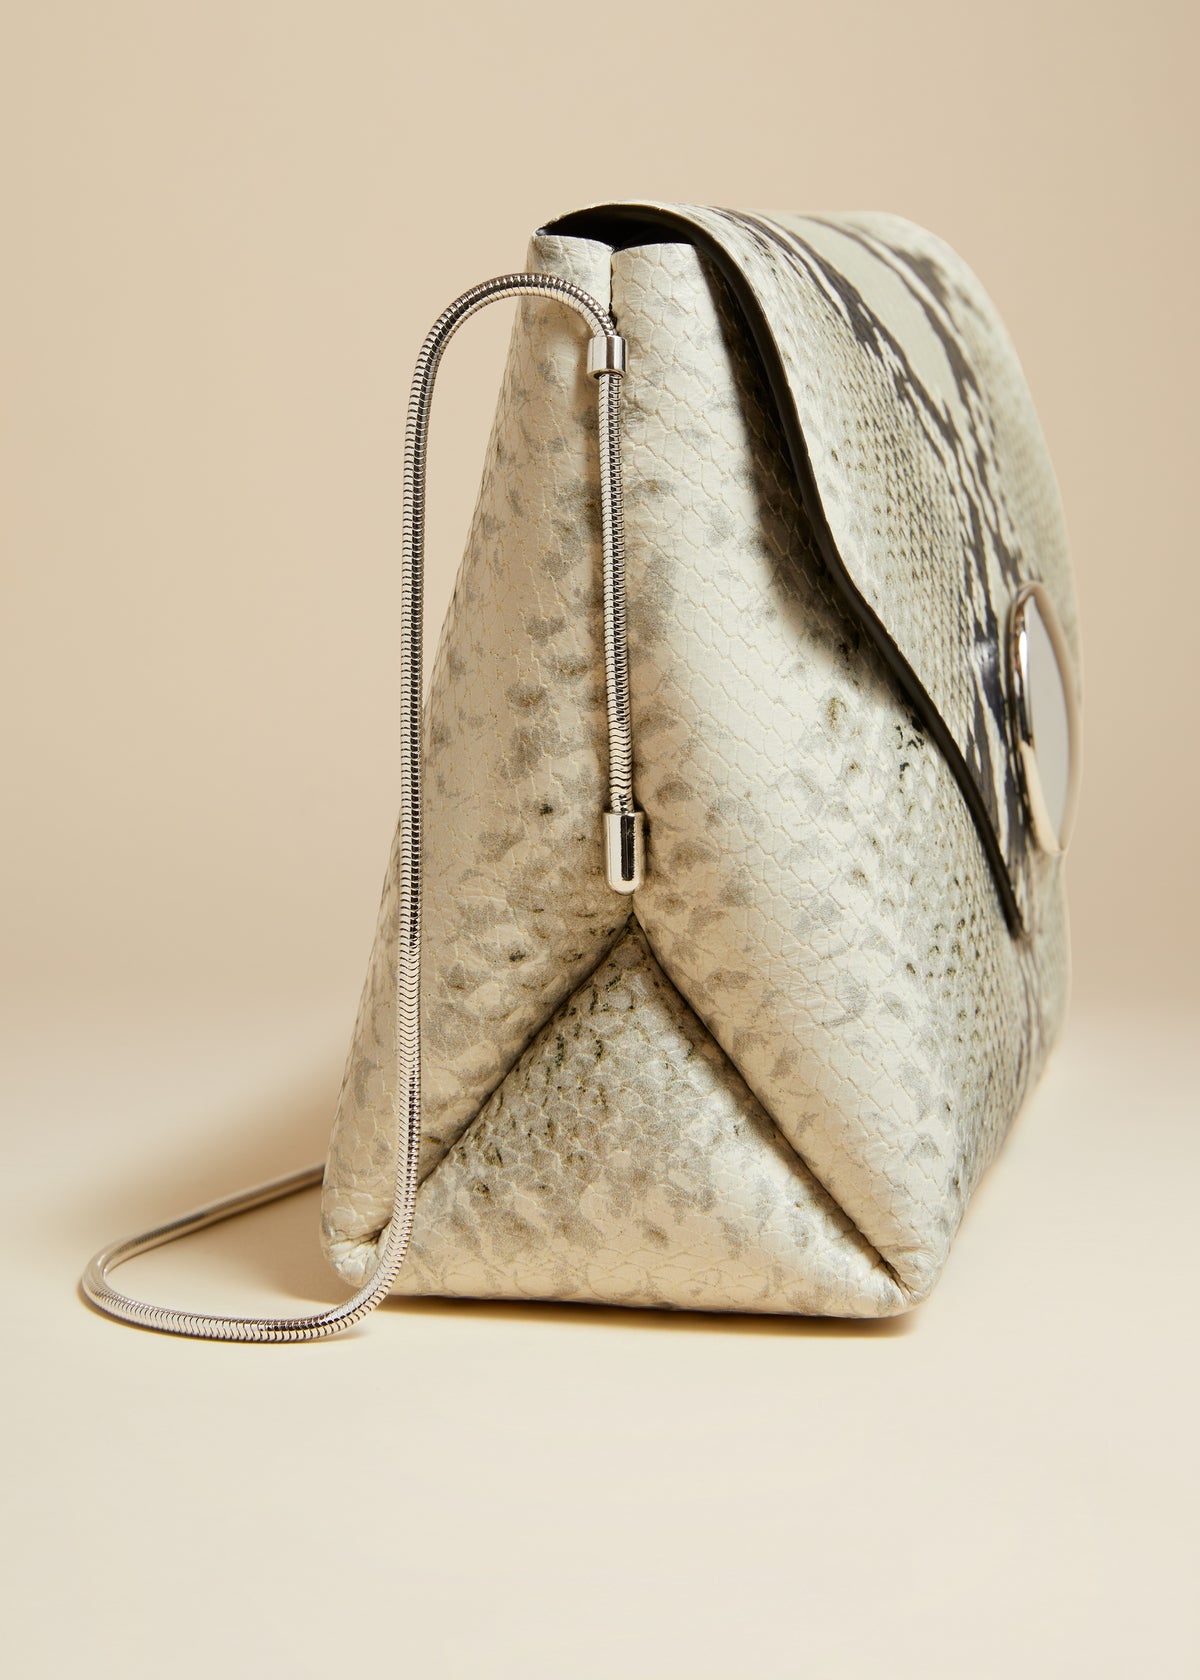 The Bobbi Bag in Natural Python-Embossed Leather - 3